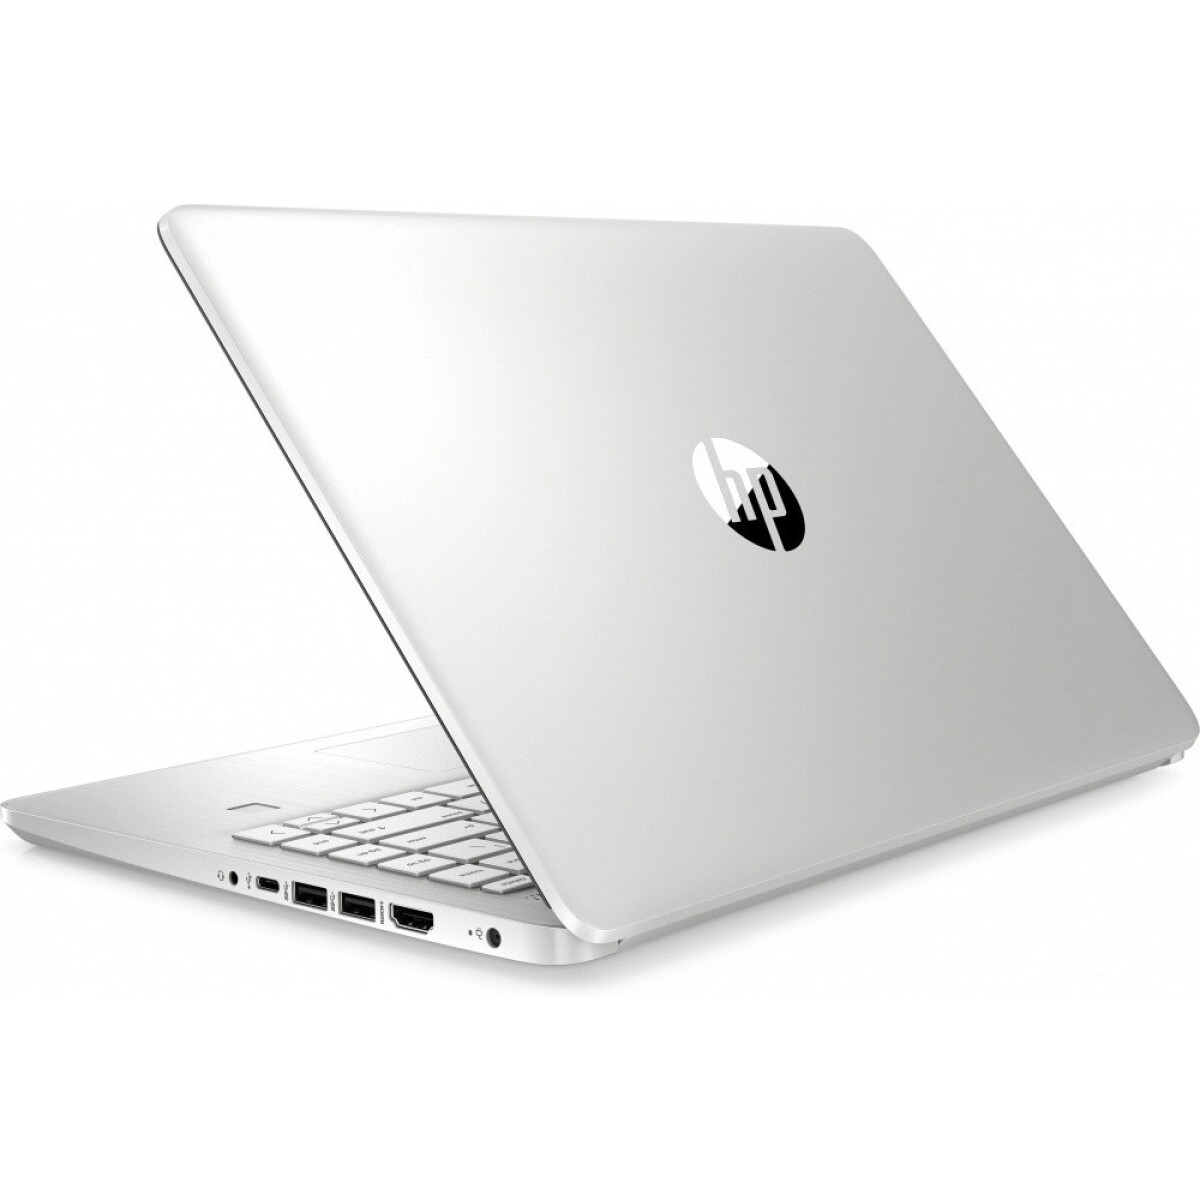 Notebook HP Core I5 4.2GHZ, 8GB, 256GB Ssd, 15.6'' Fhd - 001 